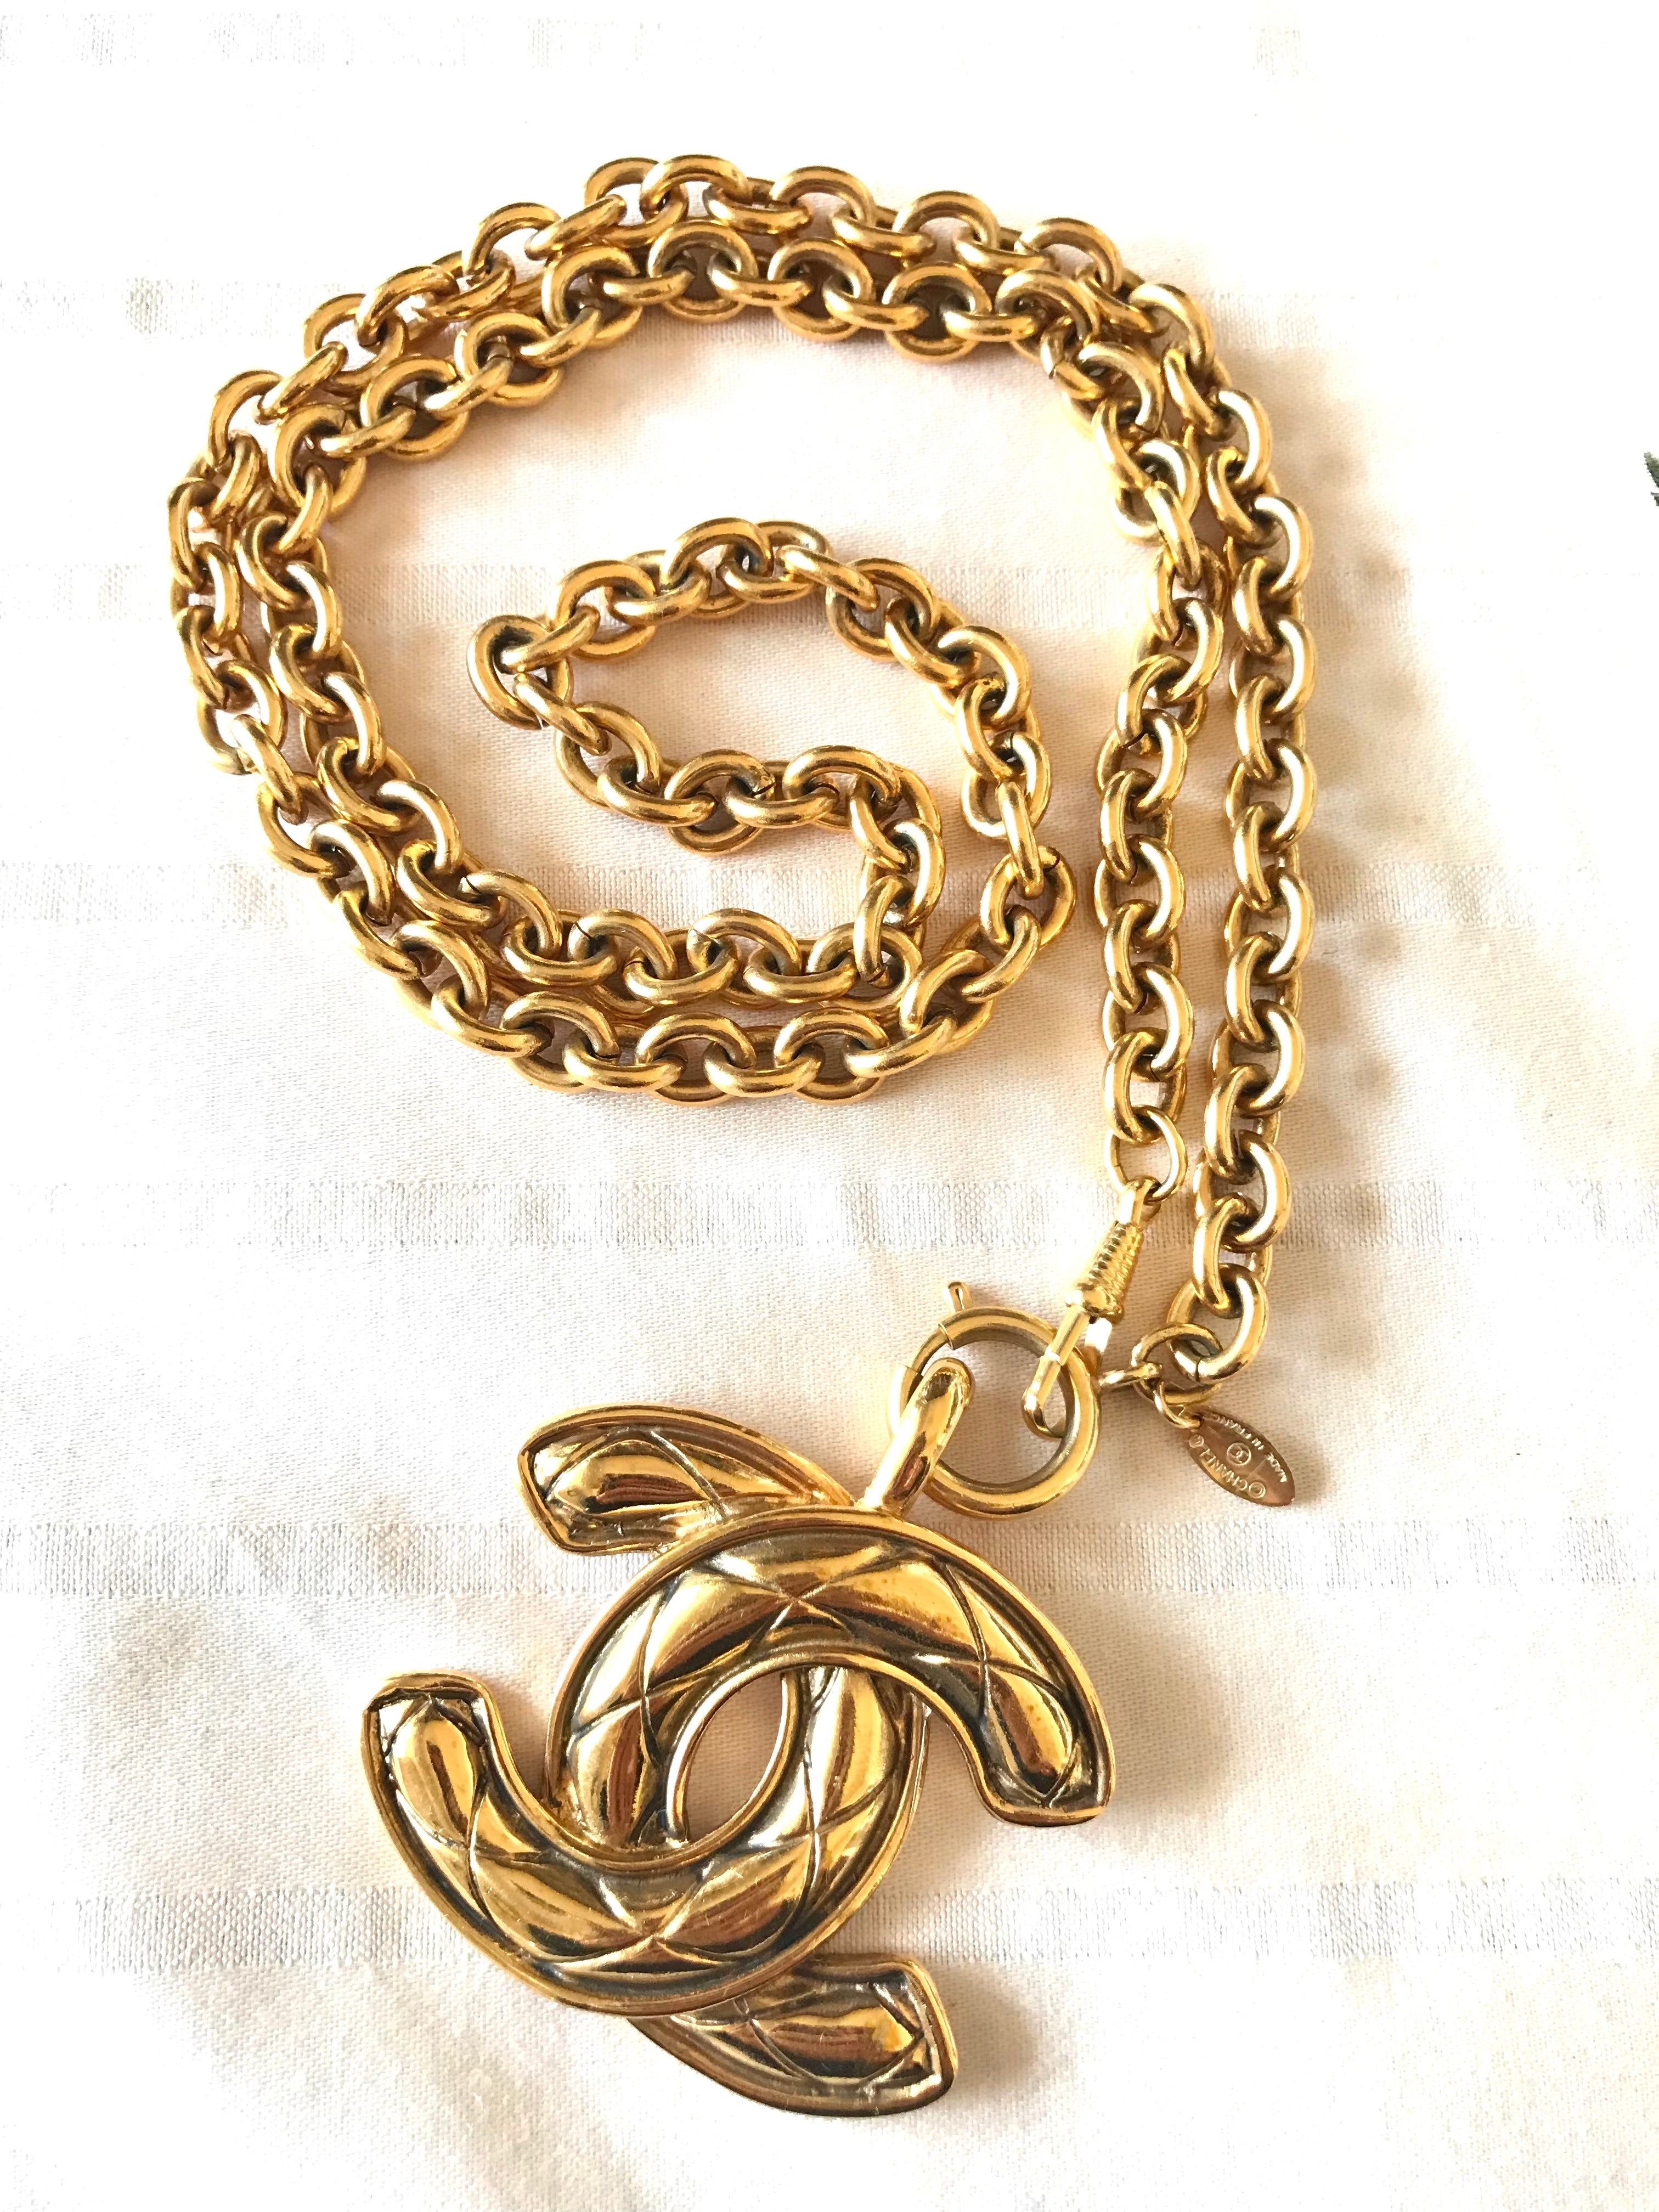 1990s. Vintage CHANEL long chain necklace with extra large